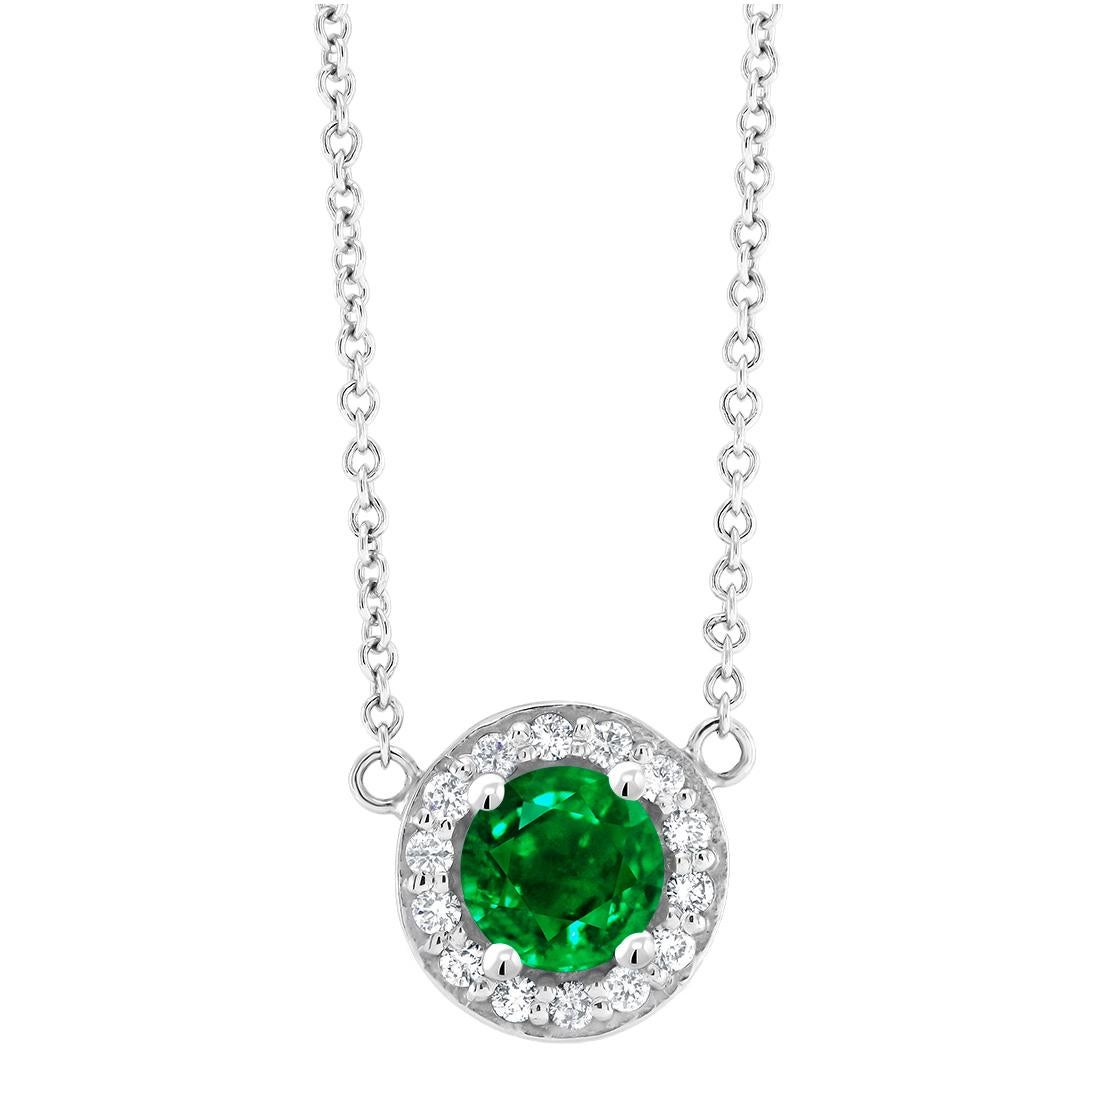 White Gold Emerald and Diamond Pendant Necklace Weighing 0.90 Carat